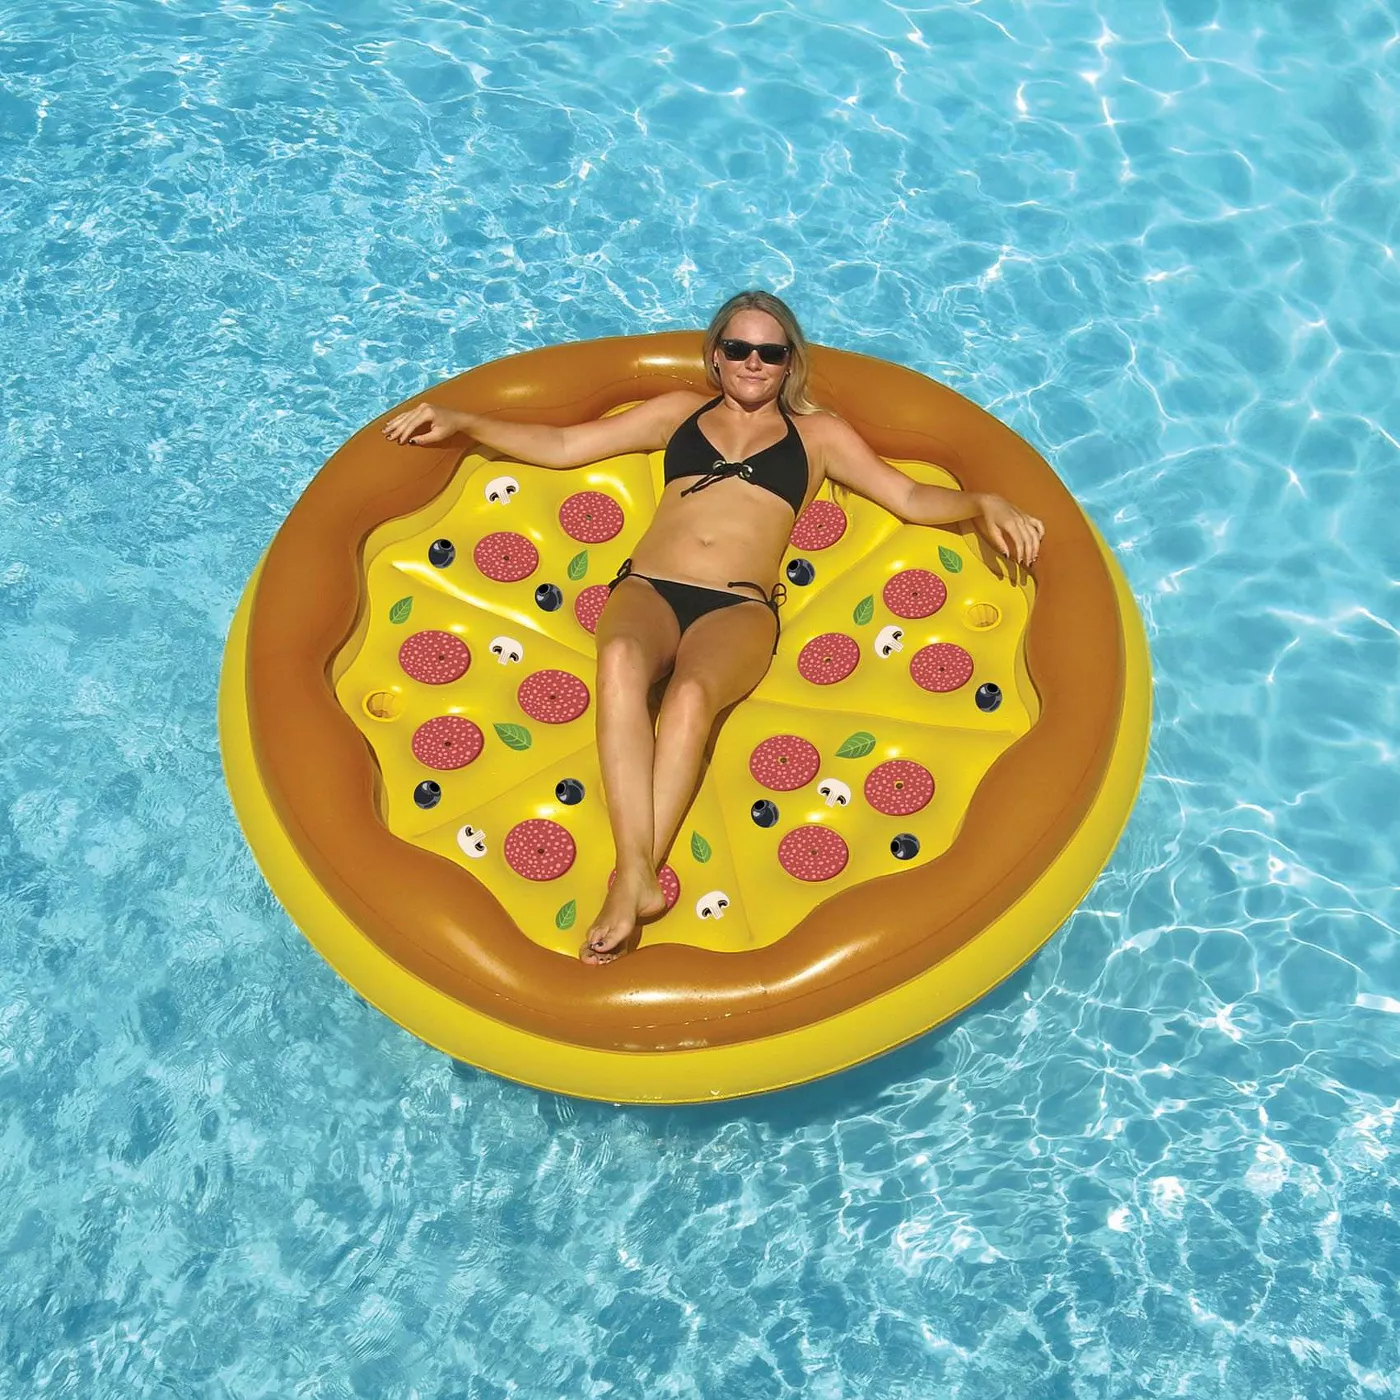 Swimline Giant Personal Pan Pizza Inflatable Island Swimming Pool Float Raft - image 2 of 6